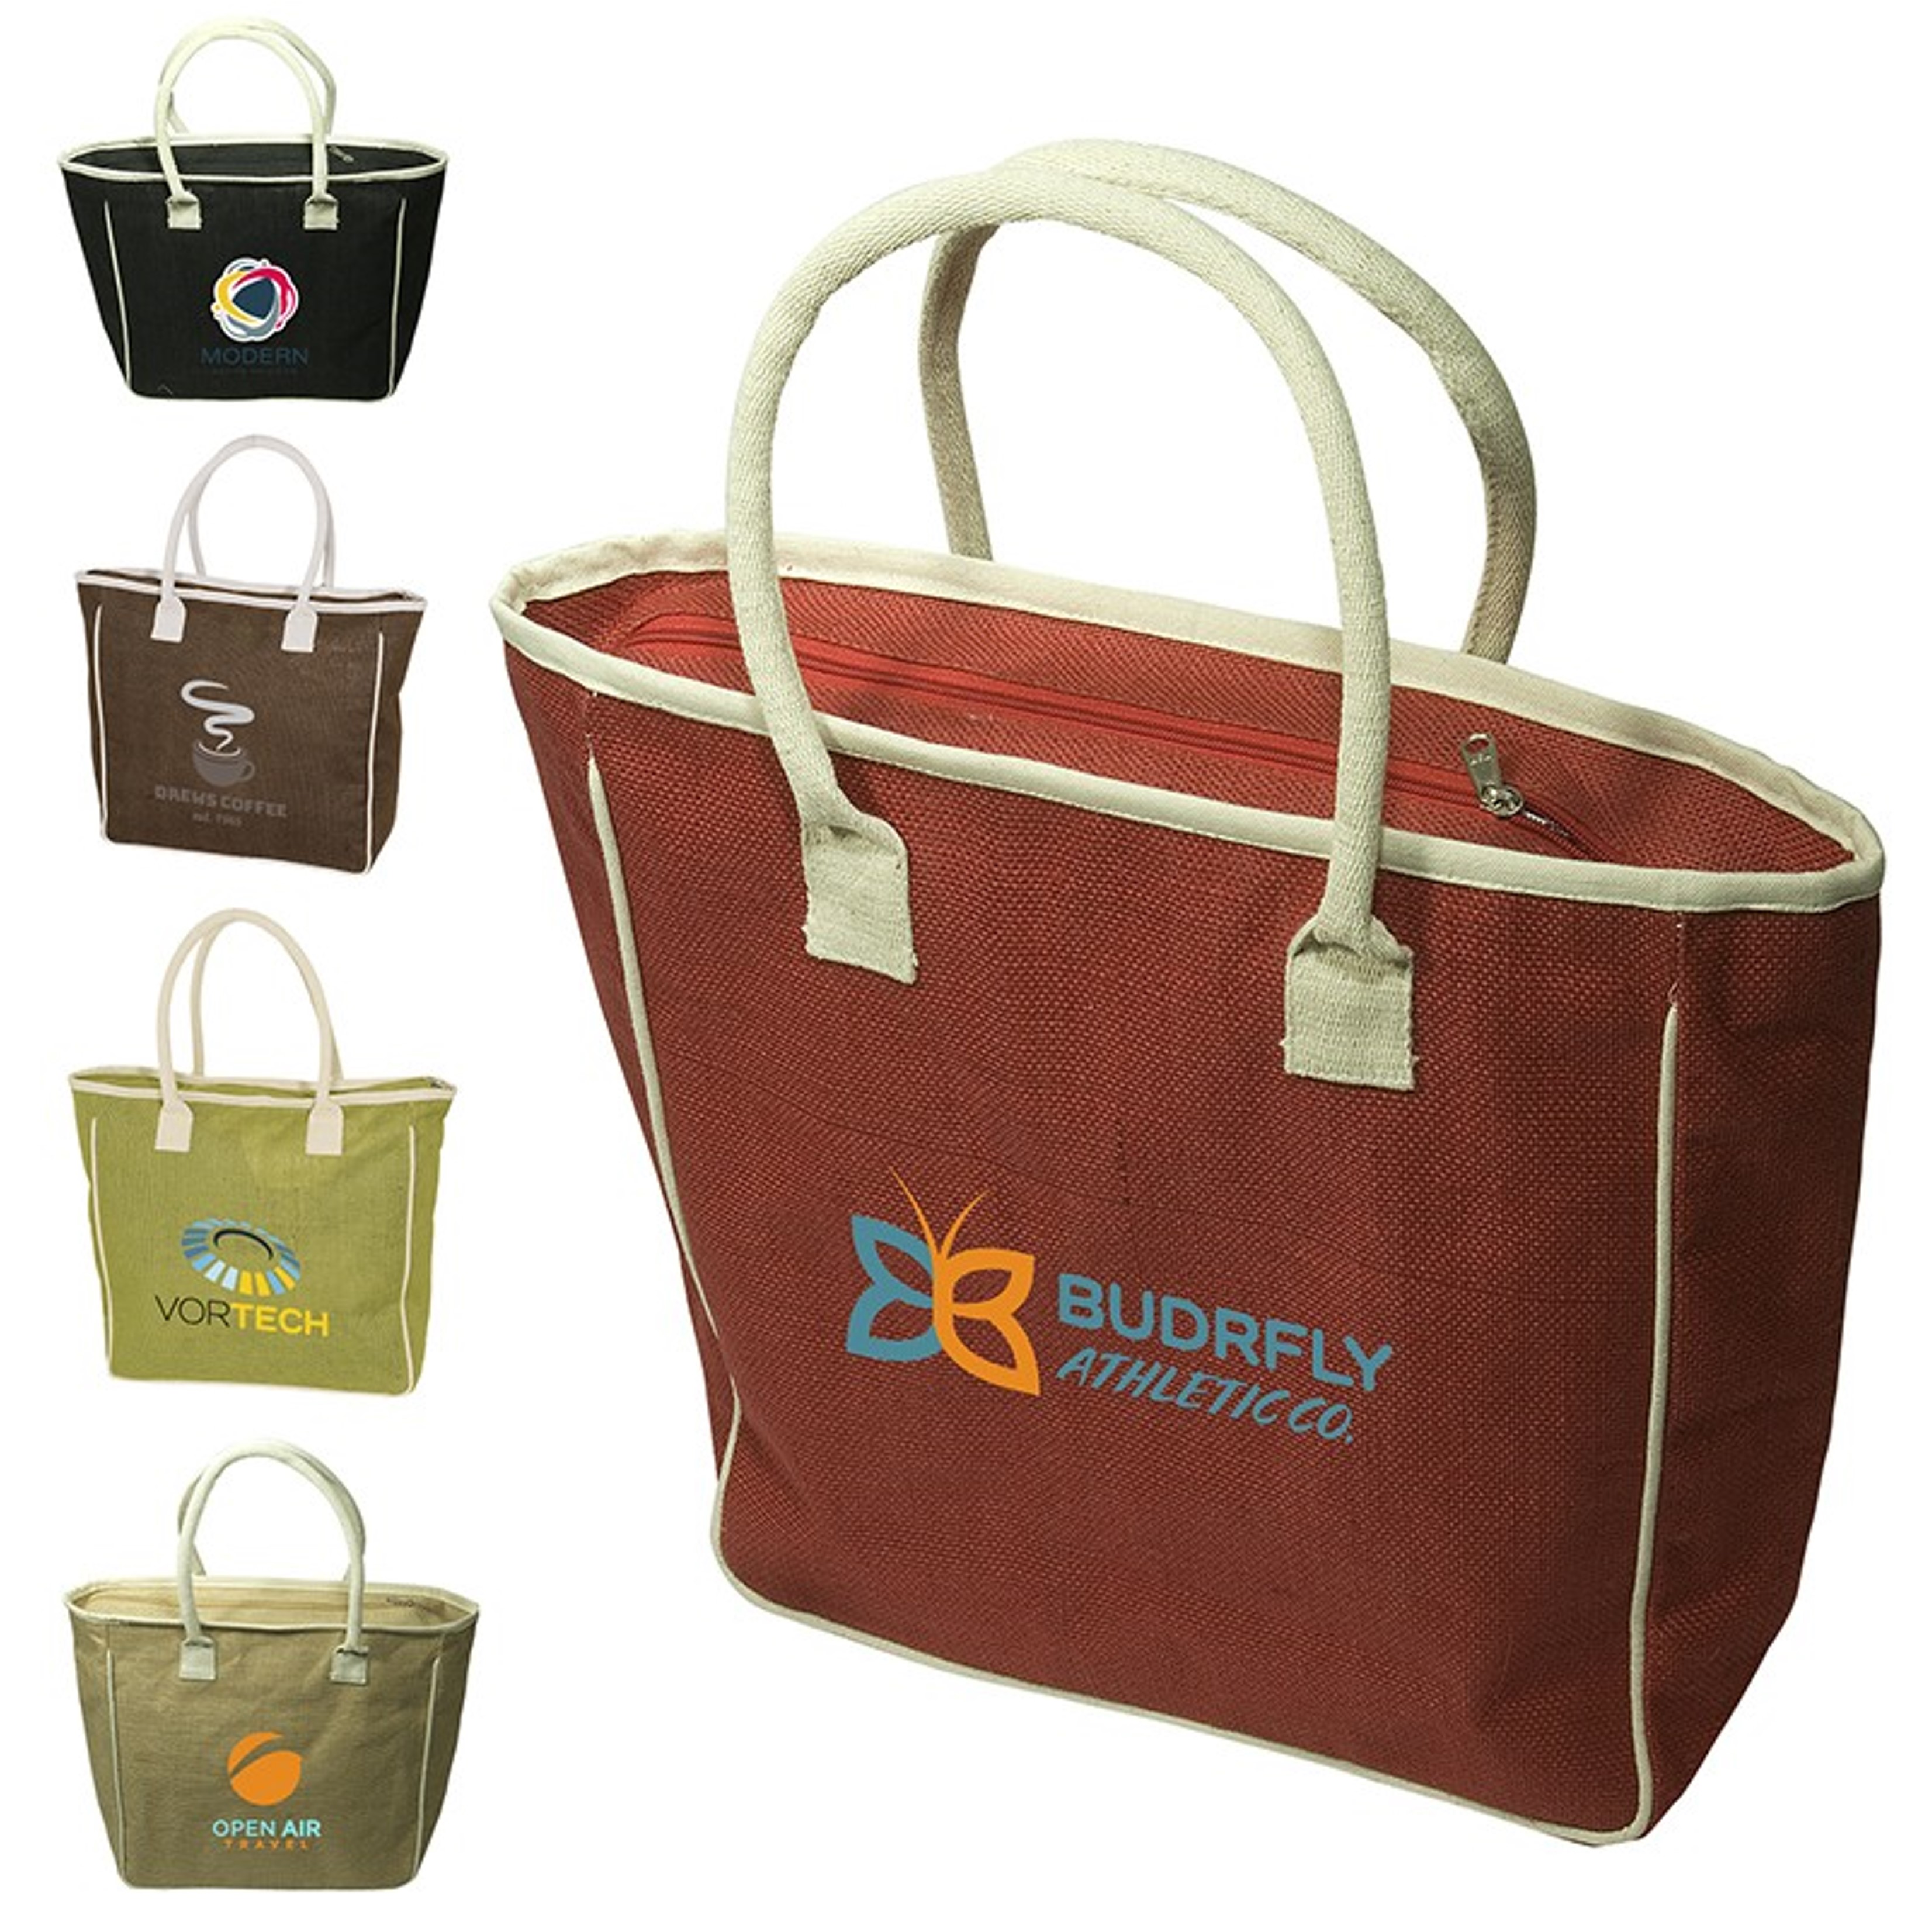 Jute & Cotton Tote | Zippered Compartment | 19x14